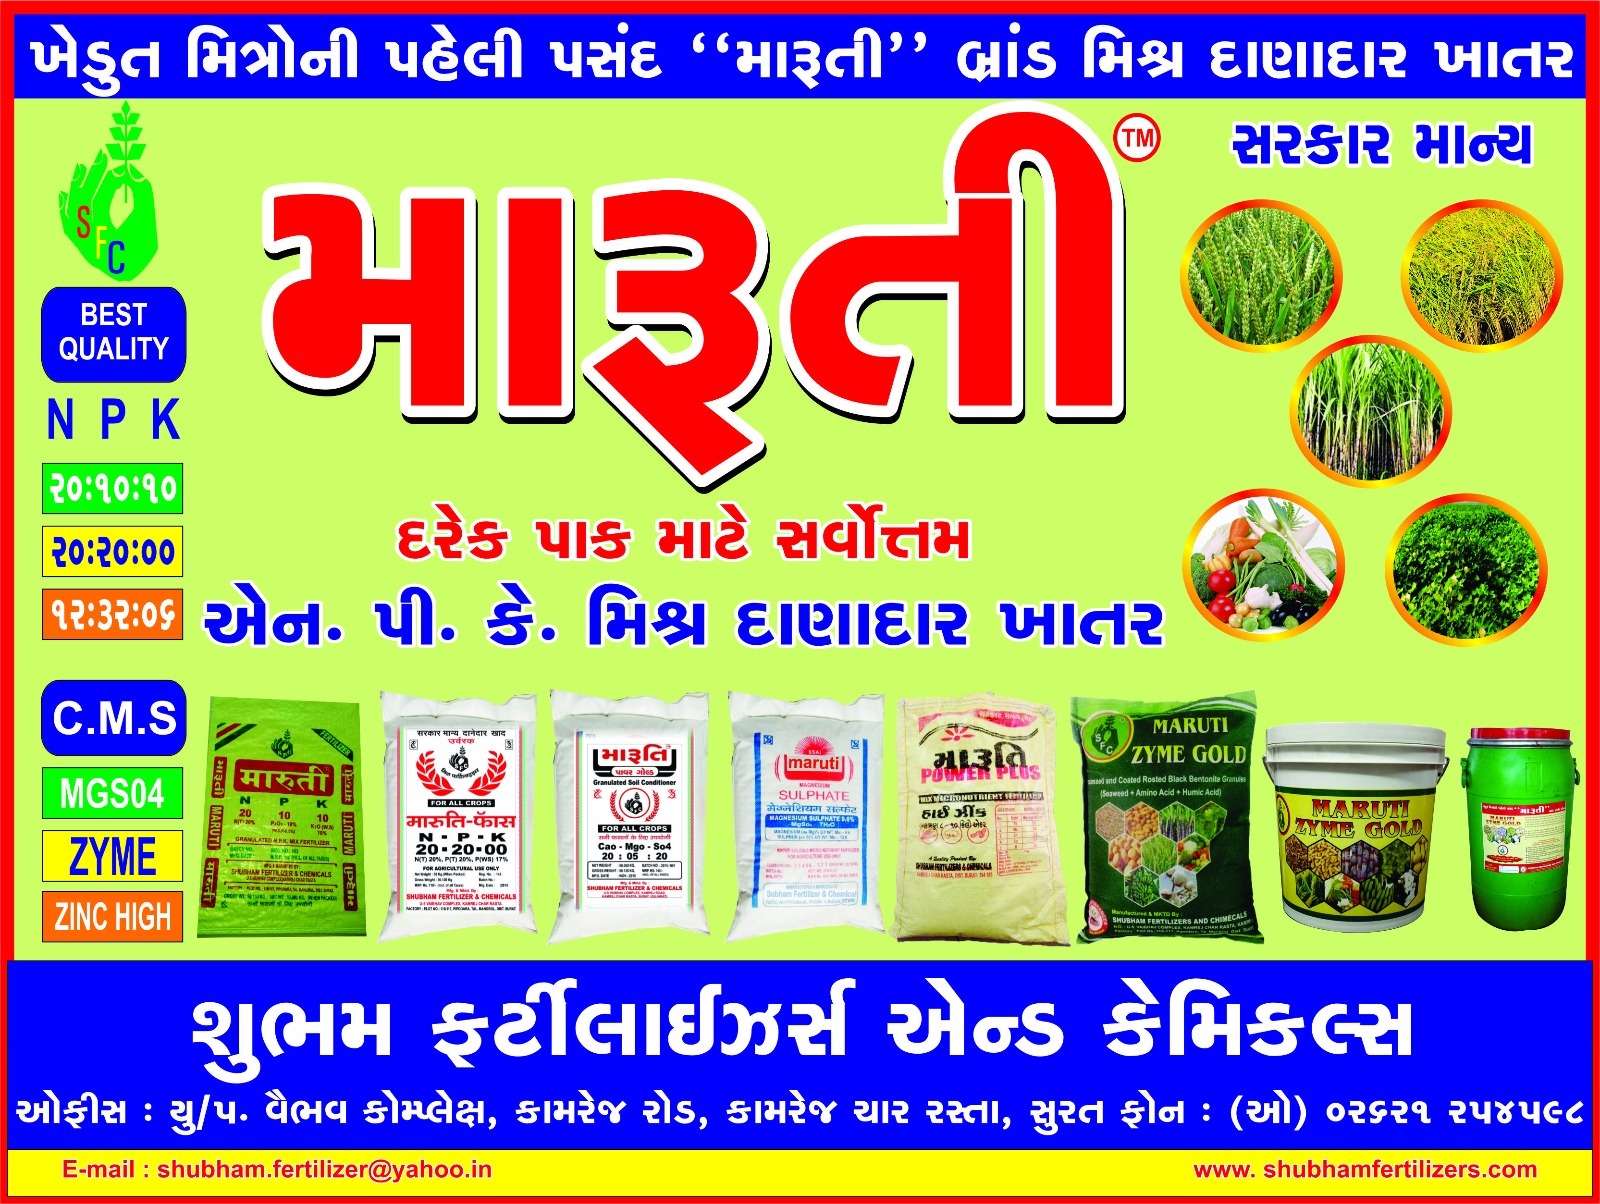 Shubham Fertilizers And Chemicals